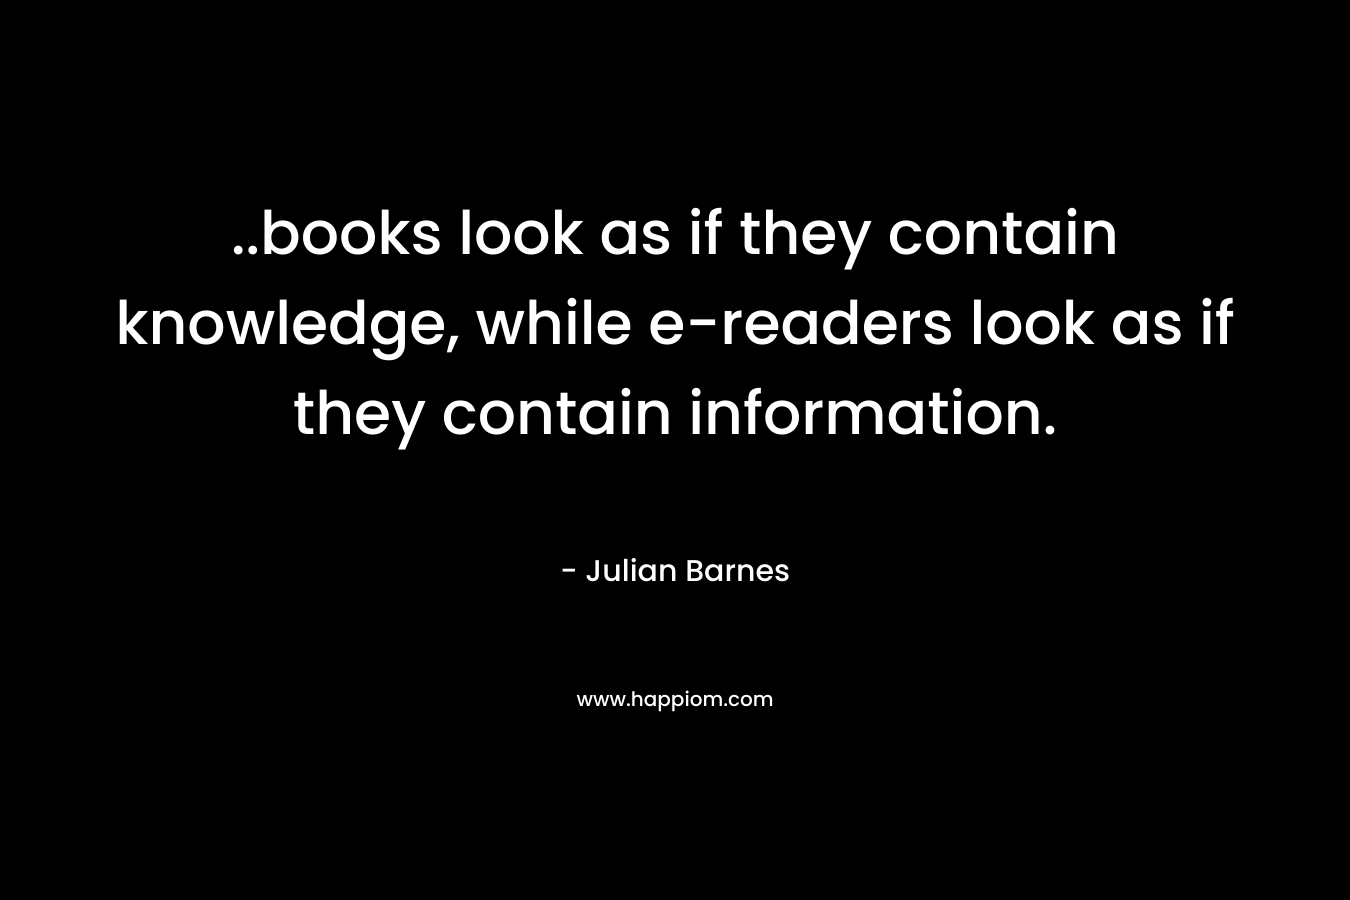 ..books look as if they contain knowledge, while e-readers look as if they contain information. – Julian Barnes